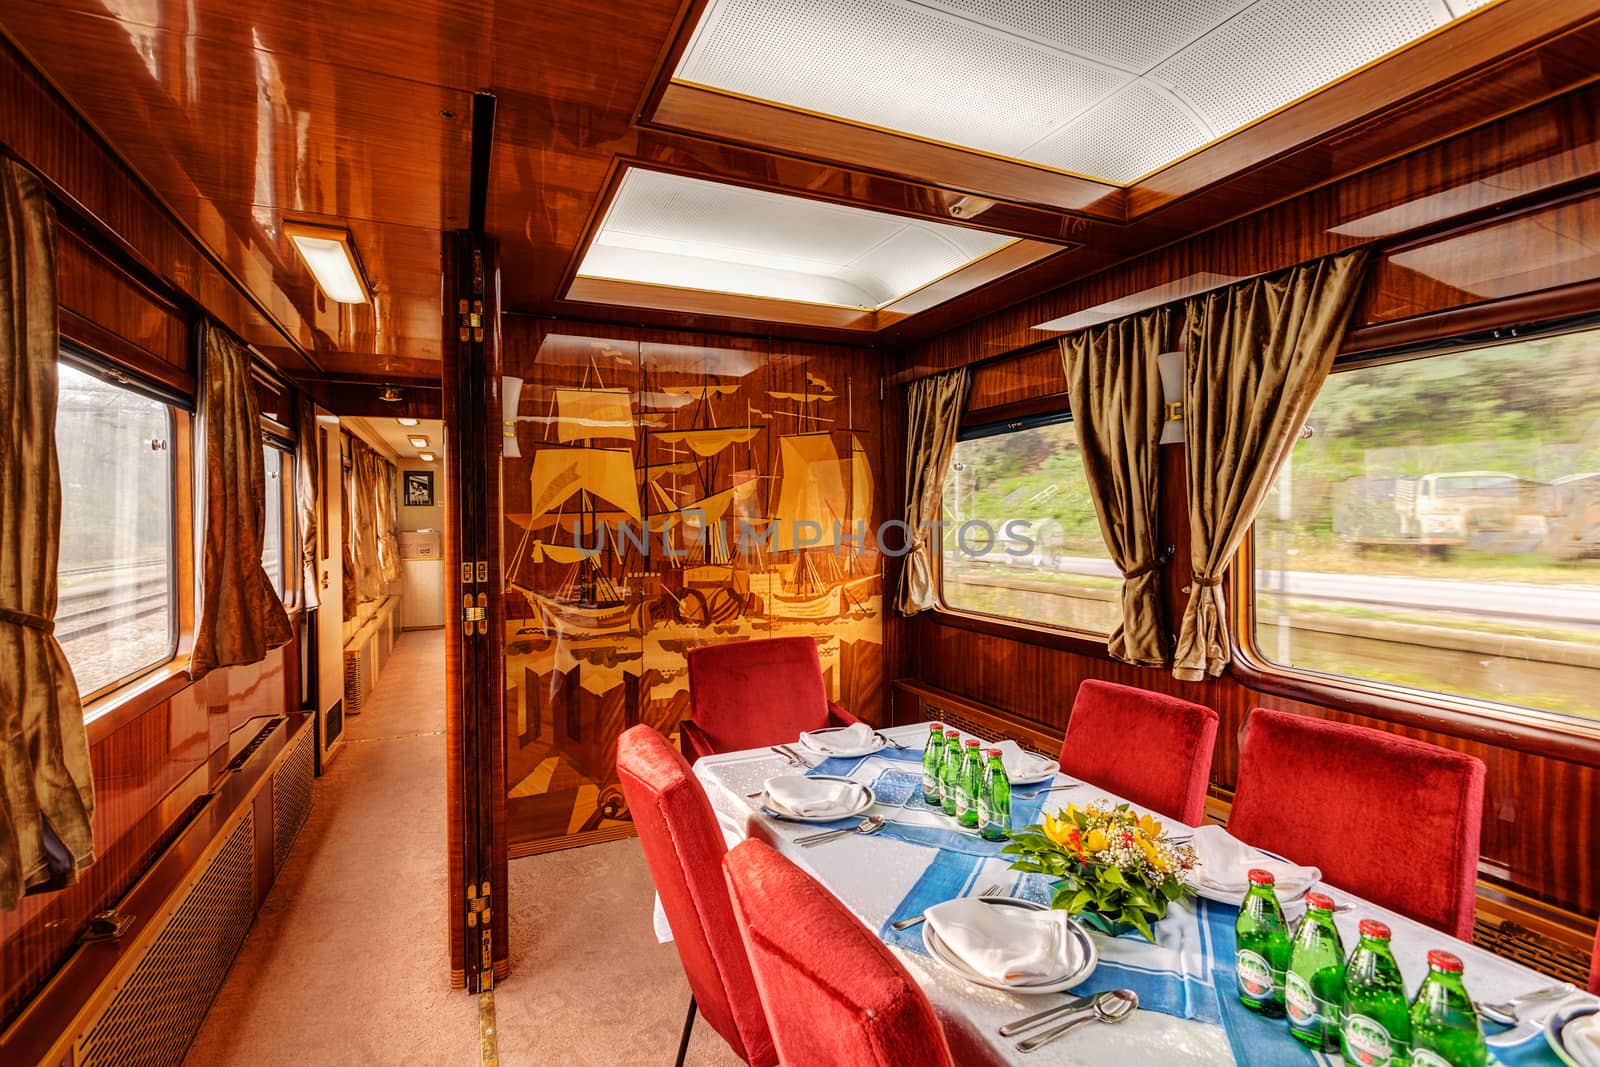 interior of luxury old train carriage